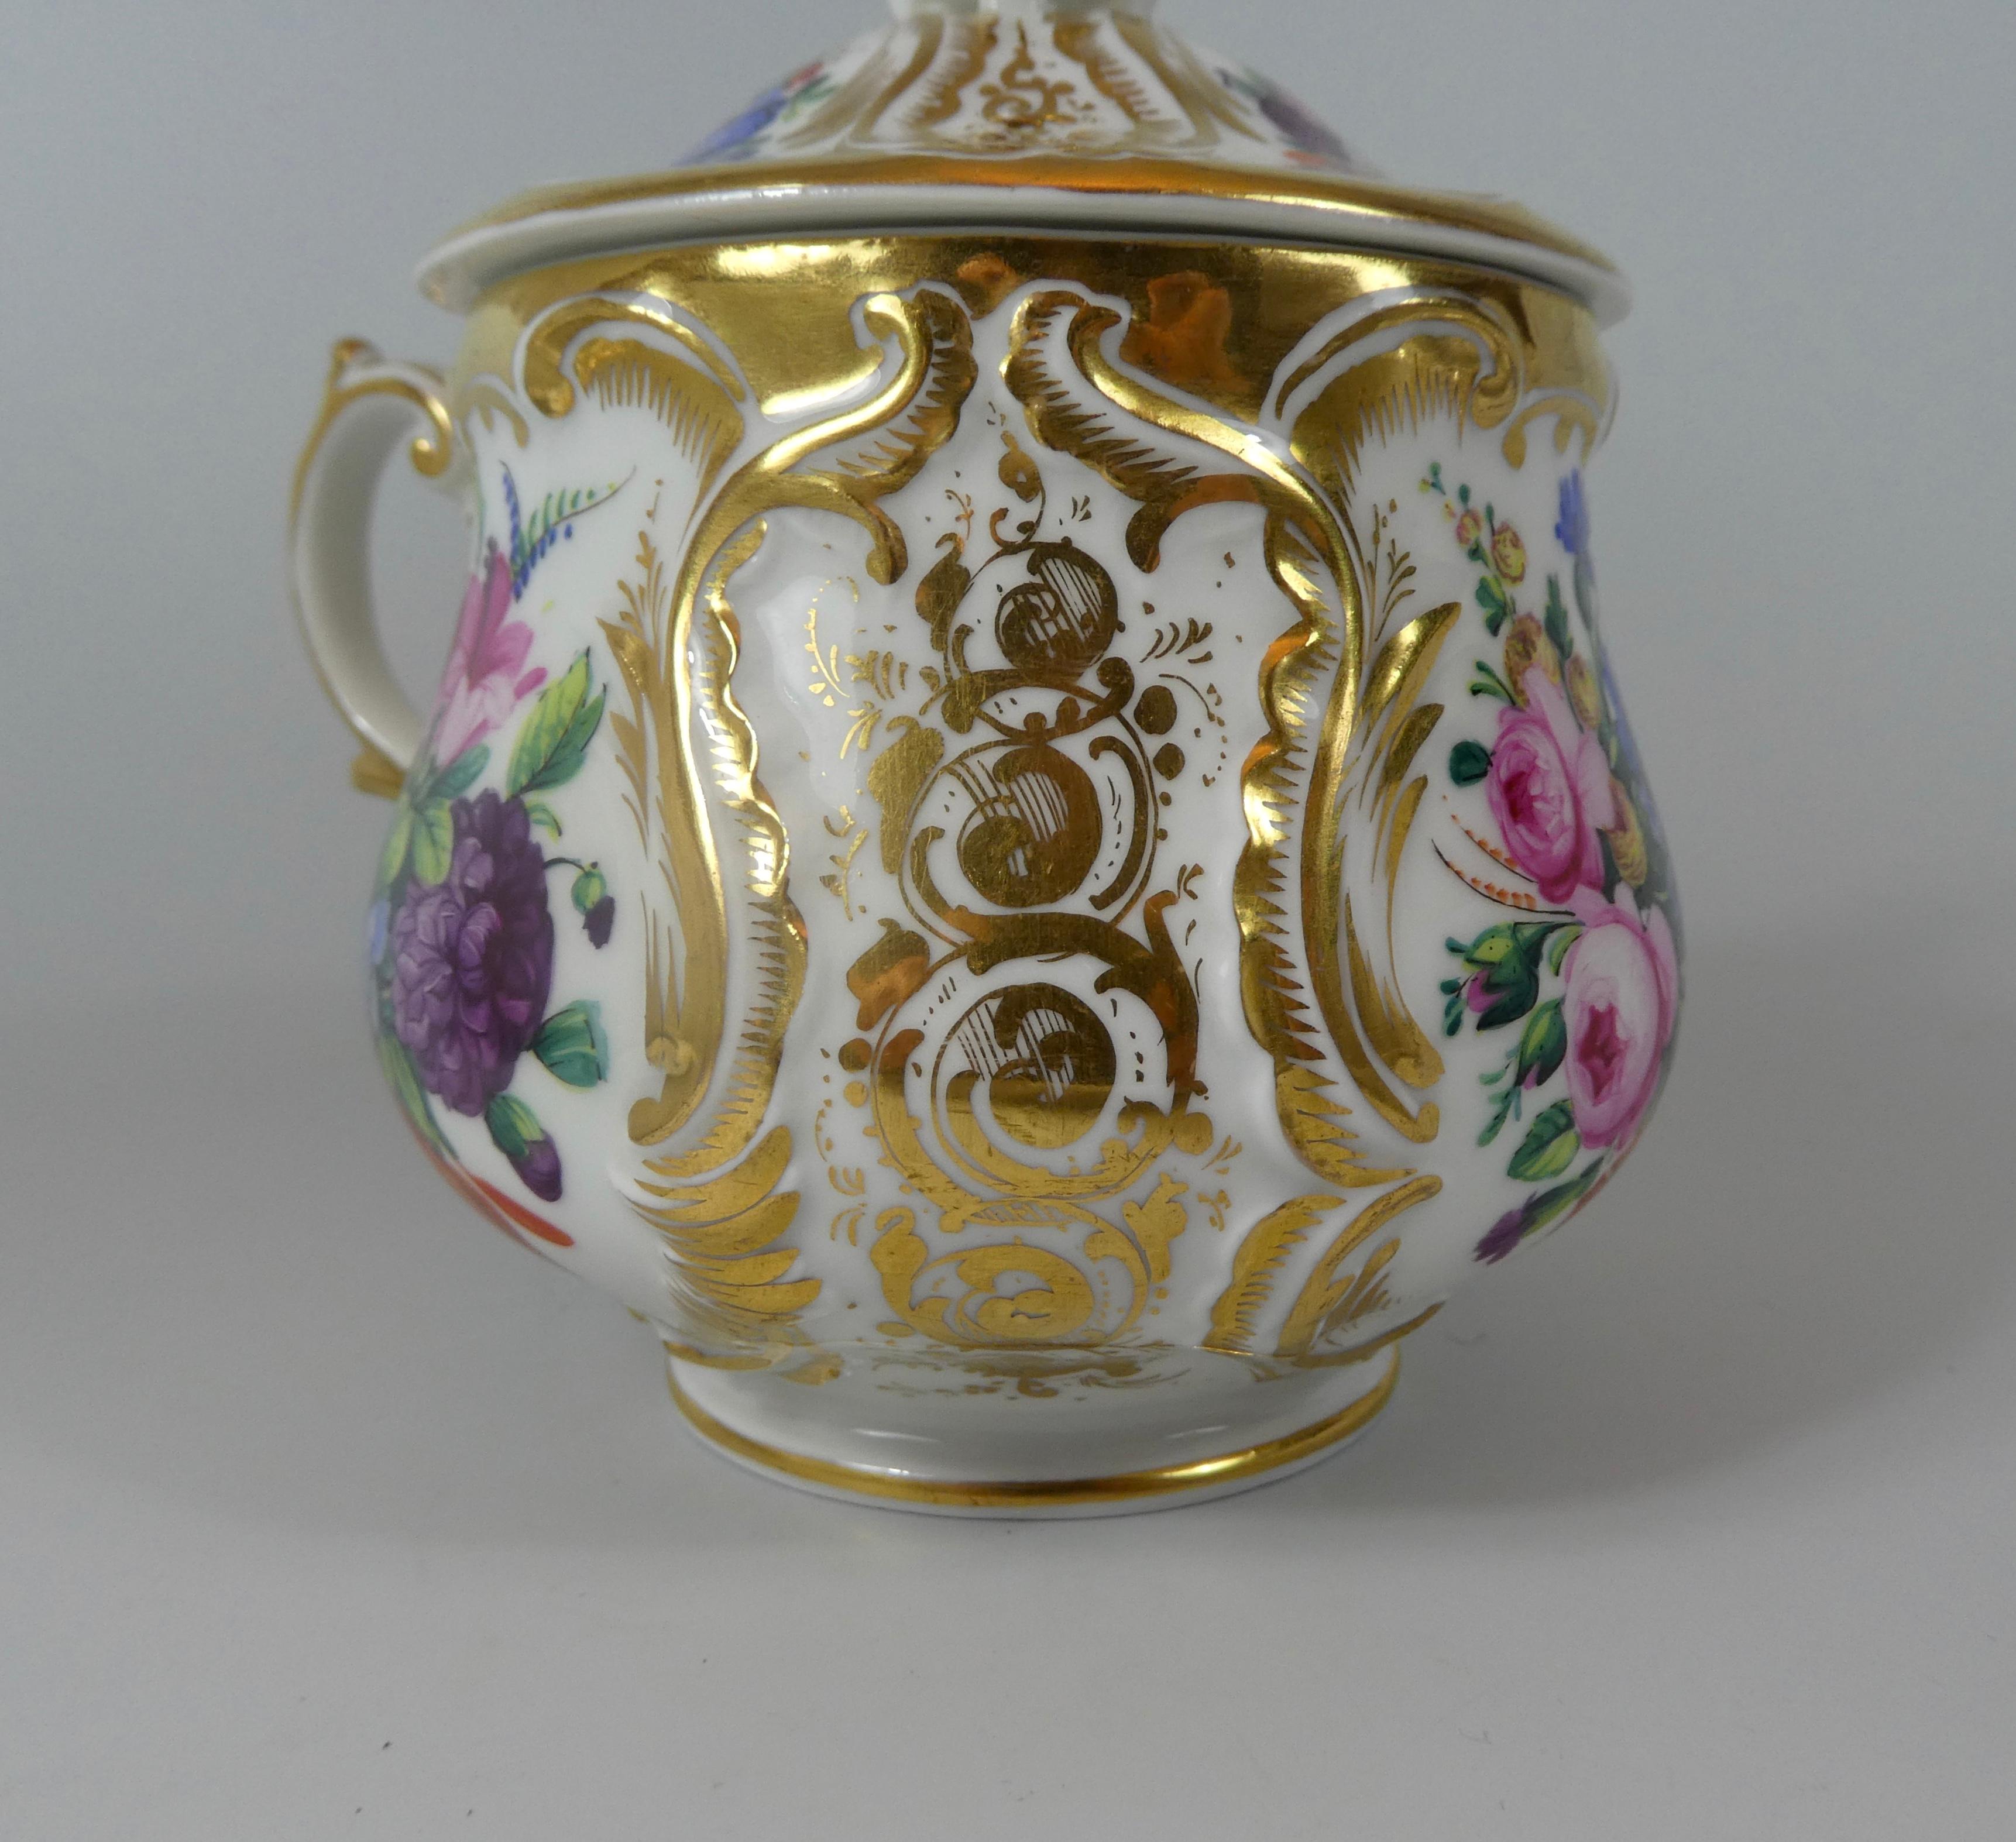 KPM Berlin Porcelain Chocolate Cup, Cover and Stand, circa 1860 1